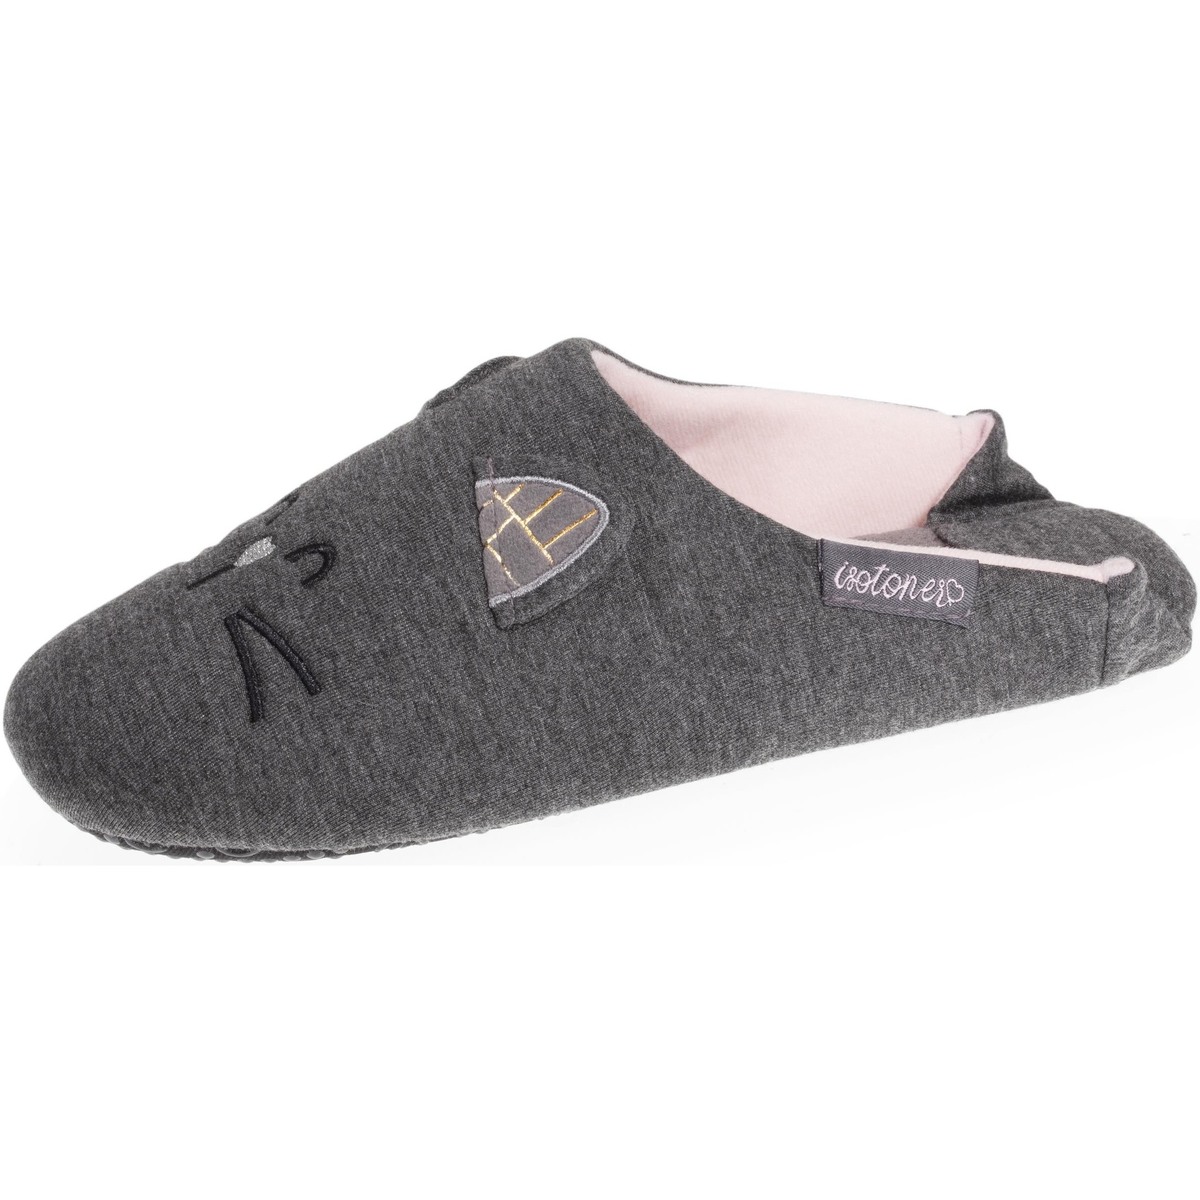 Chaussures Femme Chaussons Isotoner Chaussons mules extra-light en jersey Gris